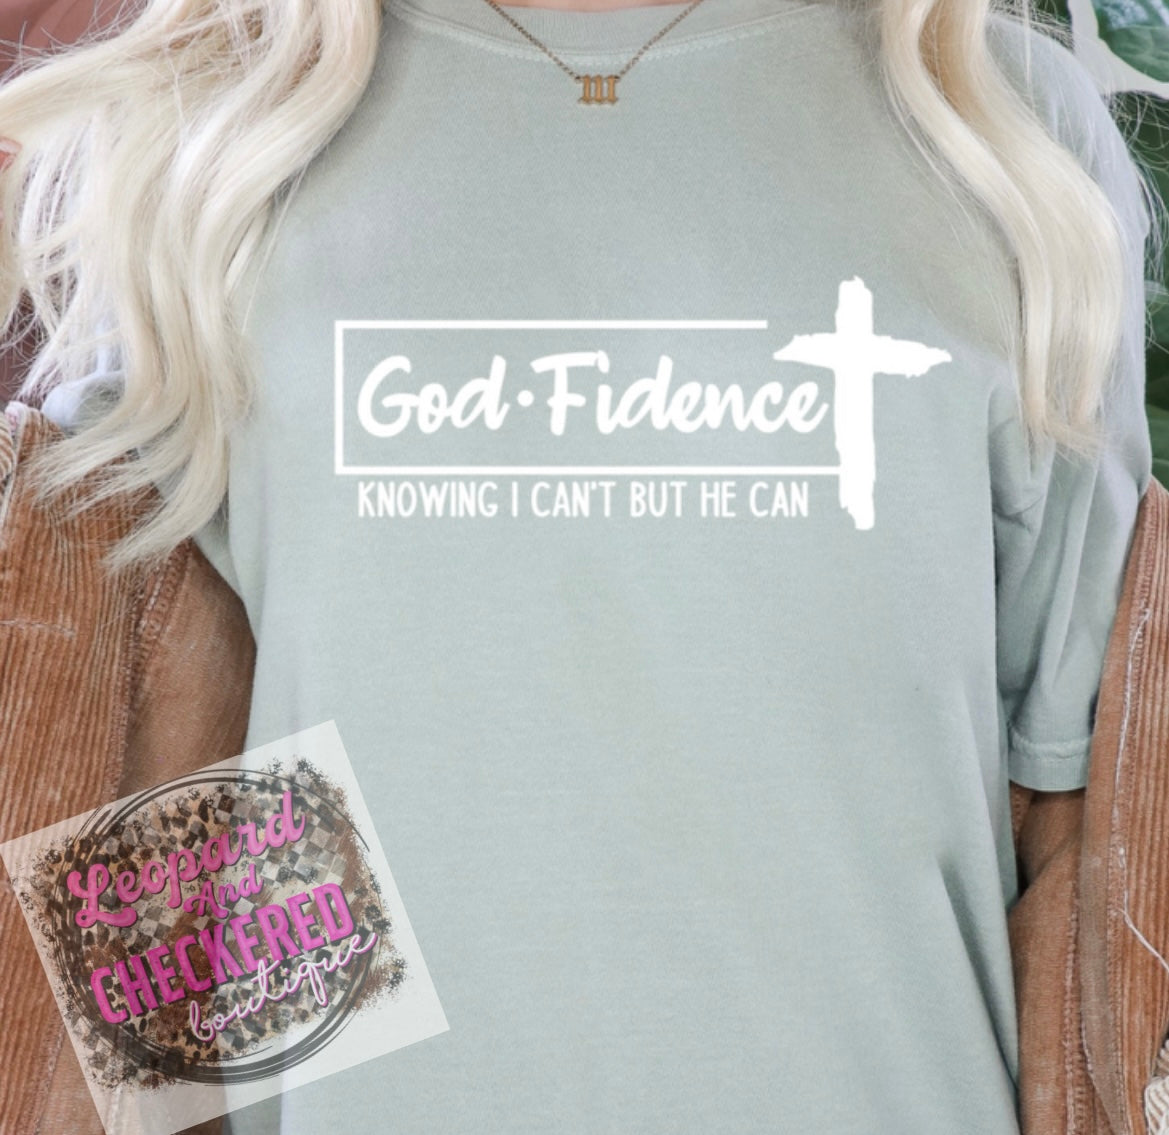 God•Fidence knowing I can’t but he can Tshirt